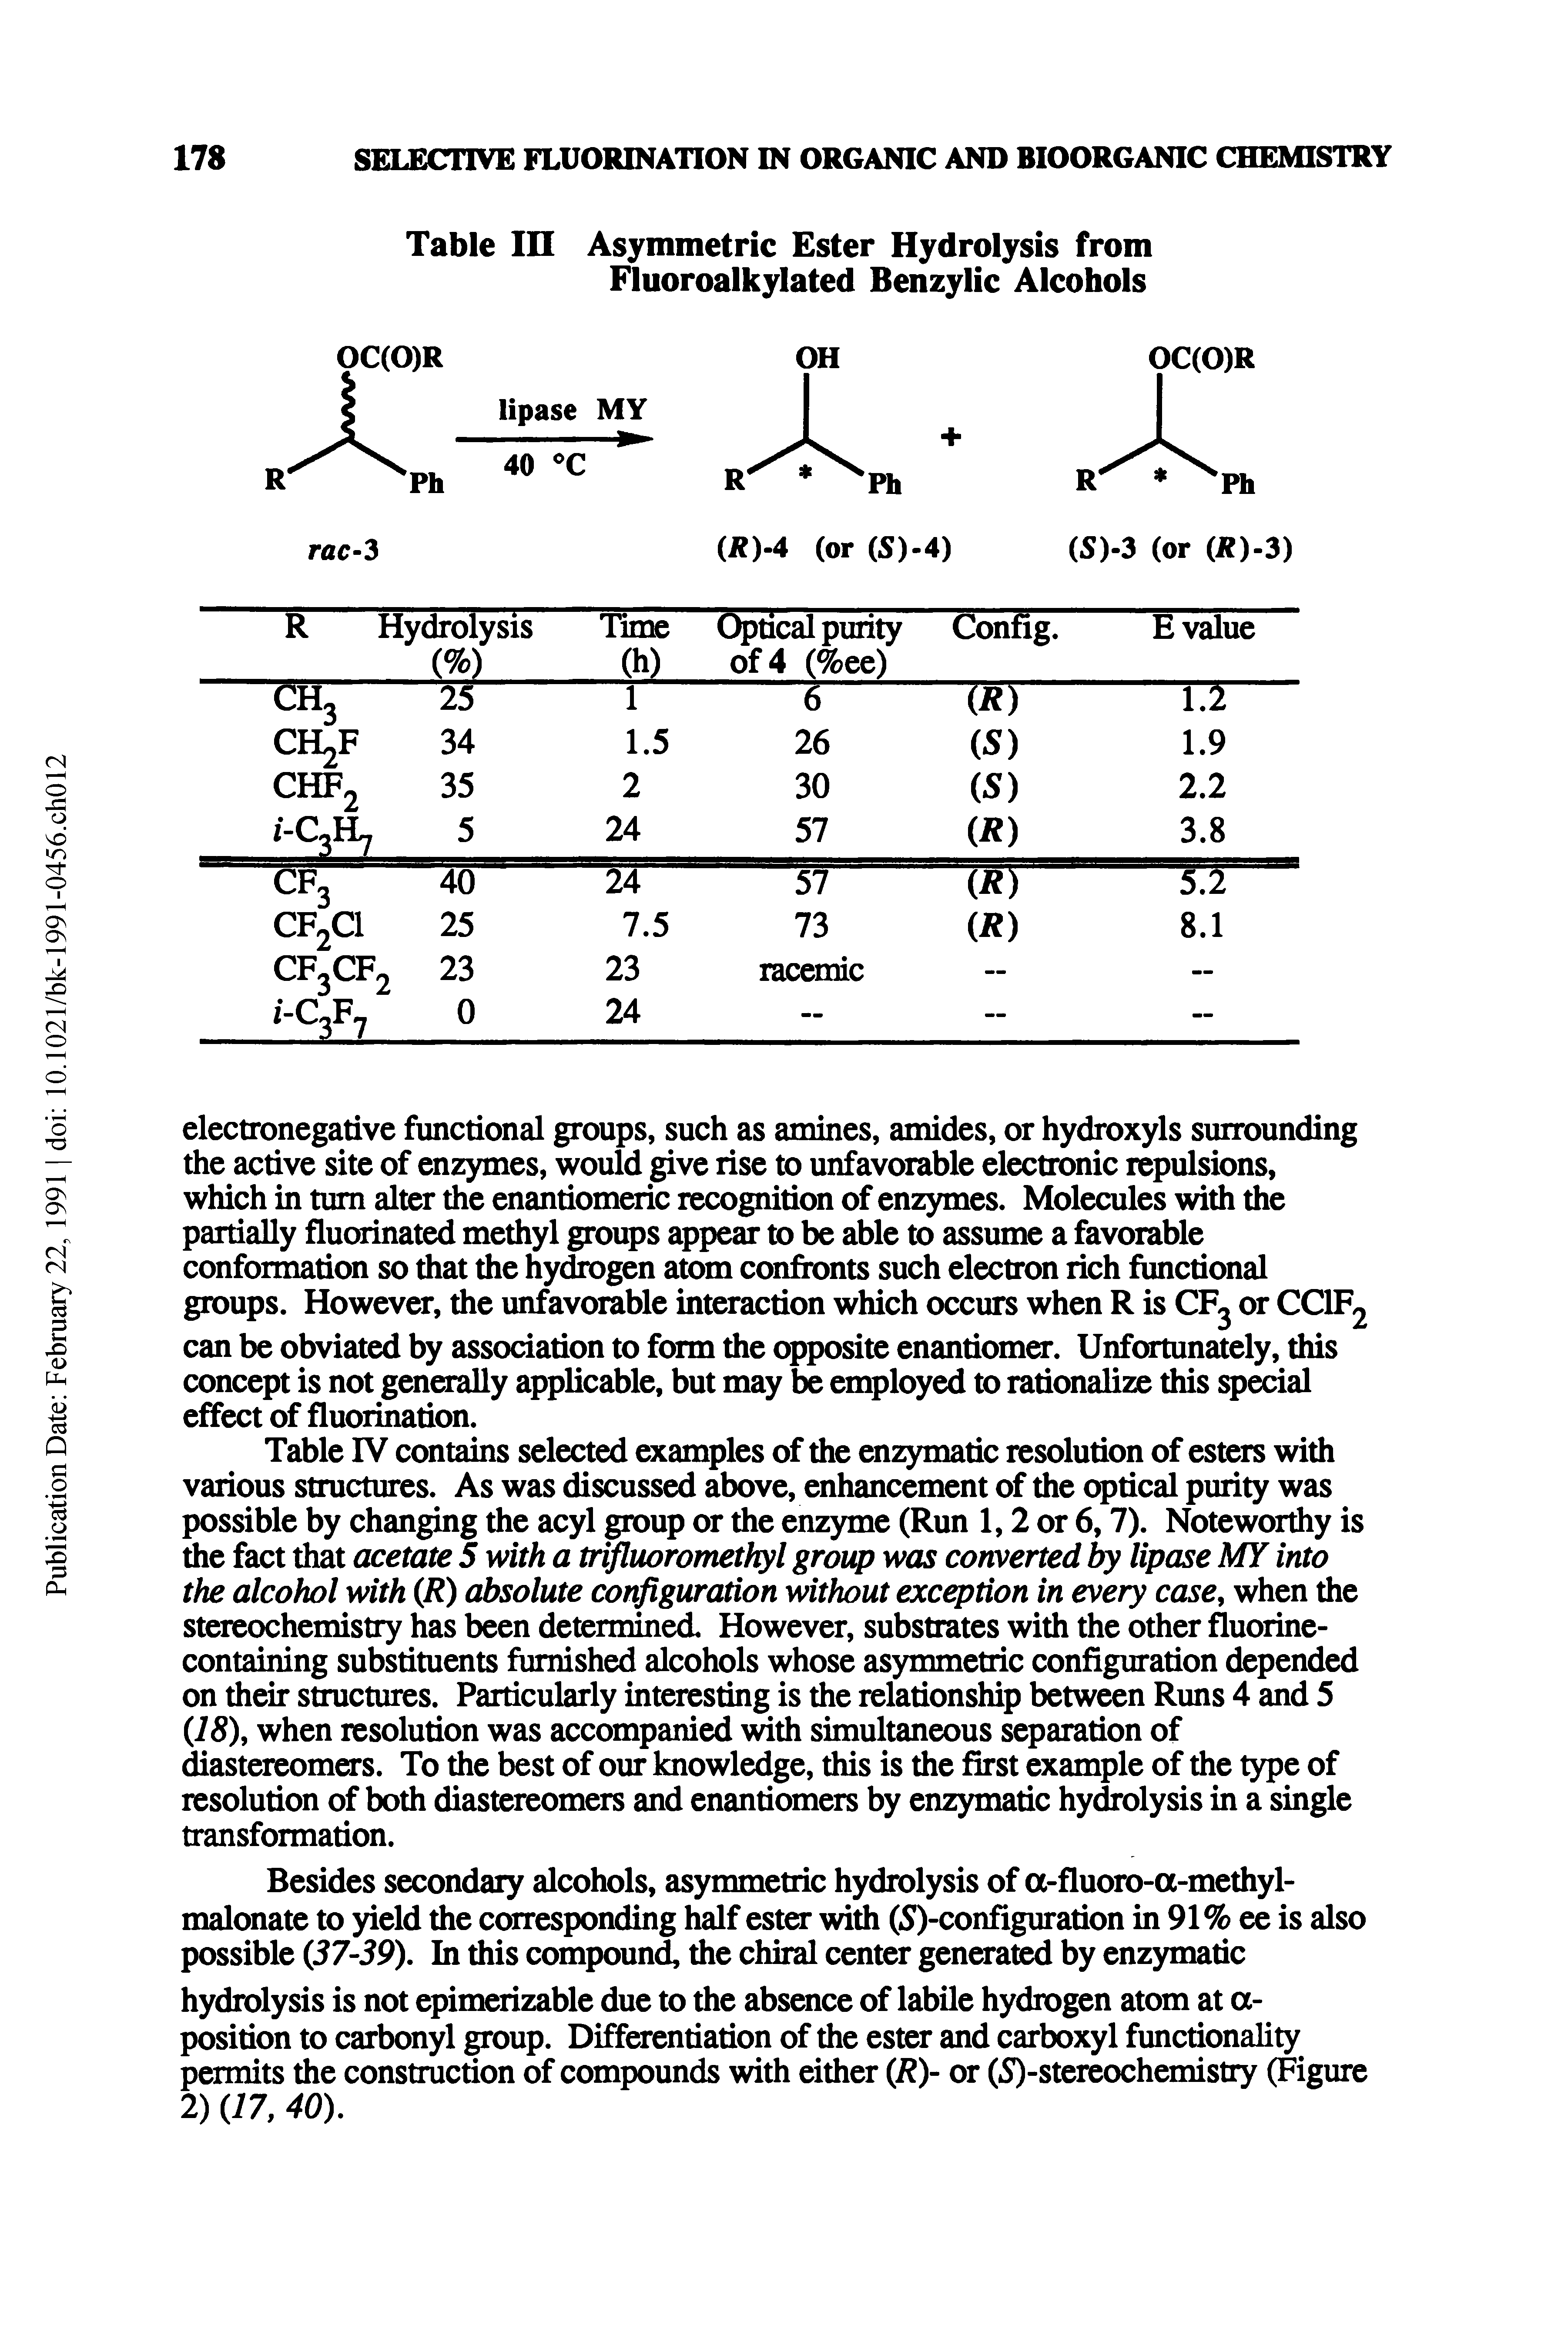 Table IV contains selected examples of the enzymatic resolution of esters with various structures. As was discussed above, enhancement of the optical purity was possible by changing the acyl group or the enzyme (Run 1,2 or 6,7). Noteworthy is the fact that acetate 5 with a trifluoromethyl group was converted by lipase MY into the alcohol with (R) absolute configuration without exception in every case, when the stereochemistry has been determined. However, substrates with the other fluorine-containing substituents furnished alcohols whose asymmetric configuration depended on their structures. Particularly interesting is the relationship between Runs 4 and 5 (18), when resolution was accompanied with simultaneous separation of diastereomers. To the best of our knowledge, this is the first example of the type of resolution of both diastereomers and enantiomers by enzymatic hydrolysis in a single transformation.